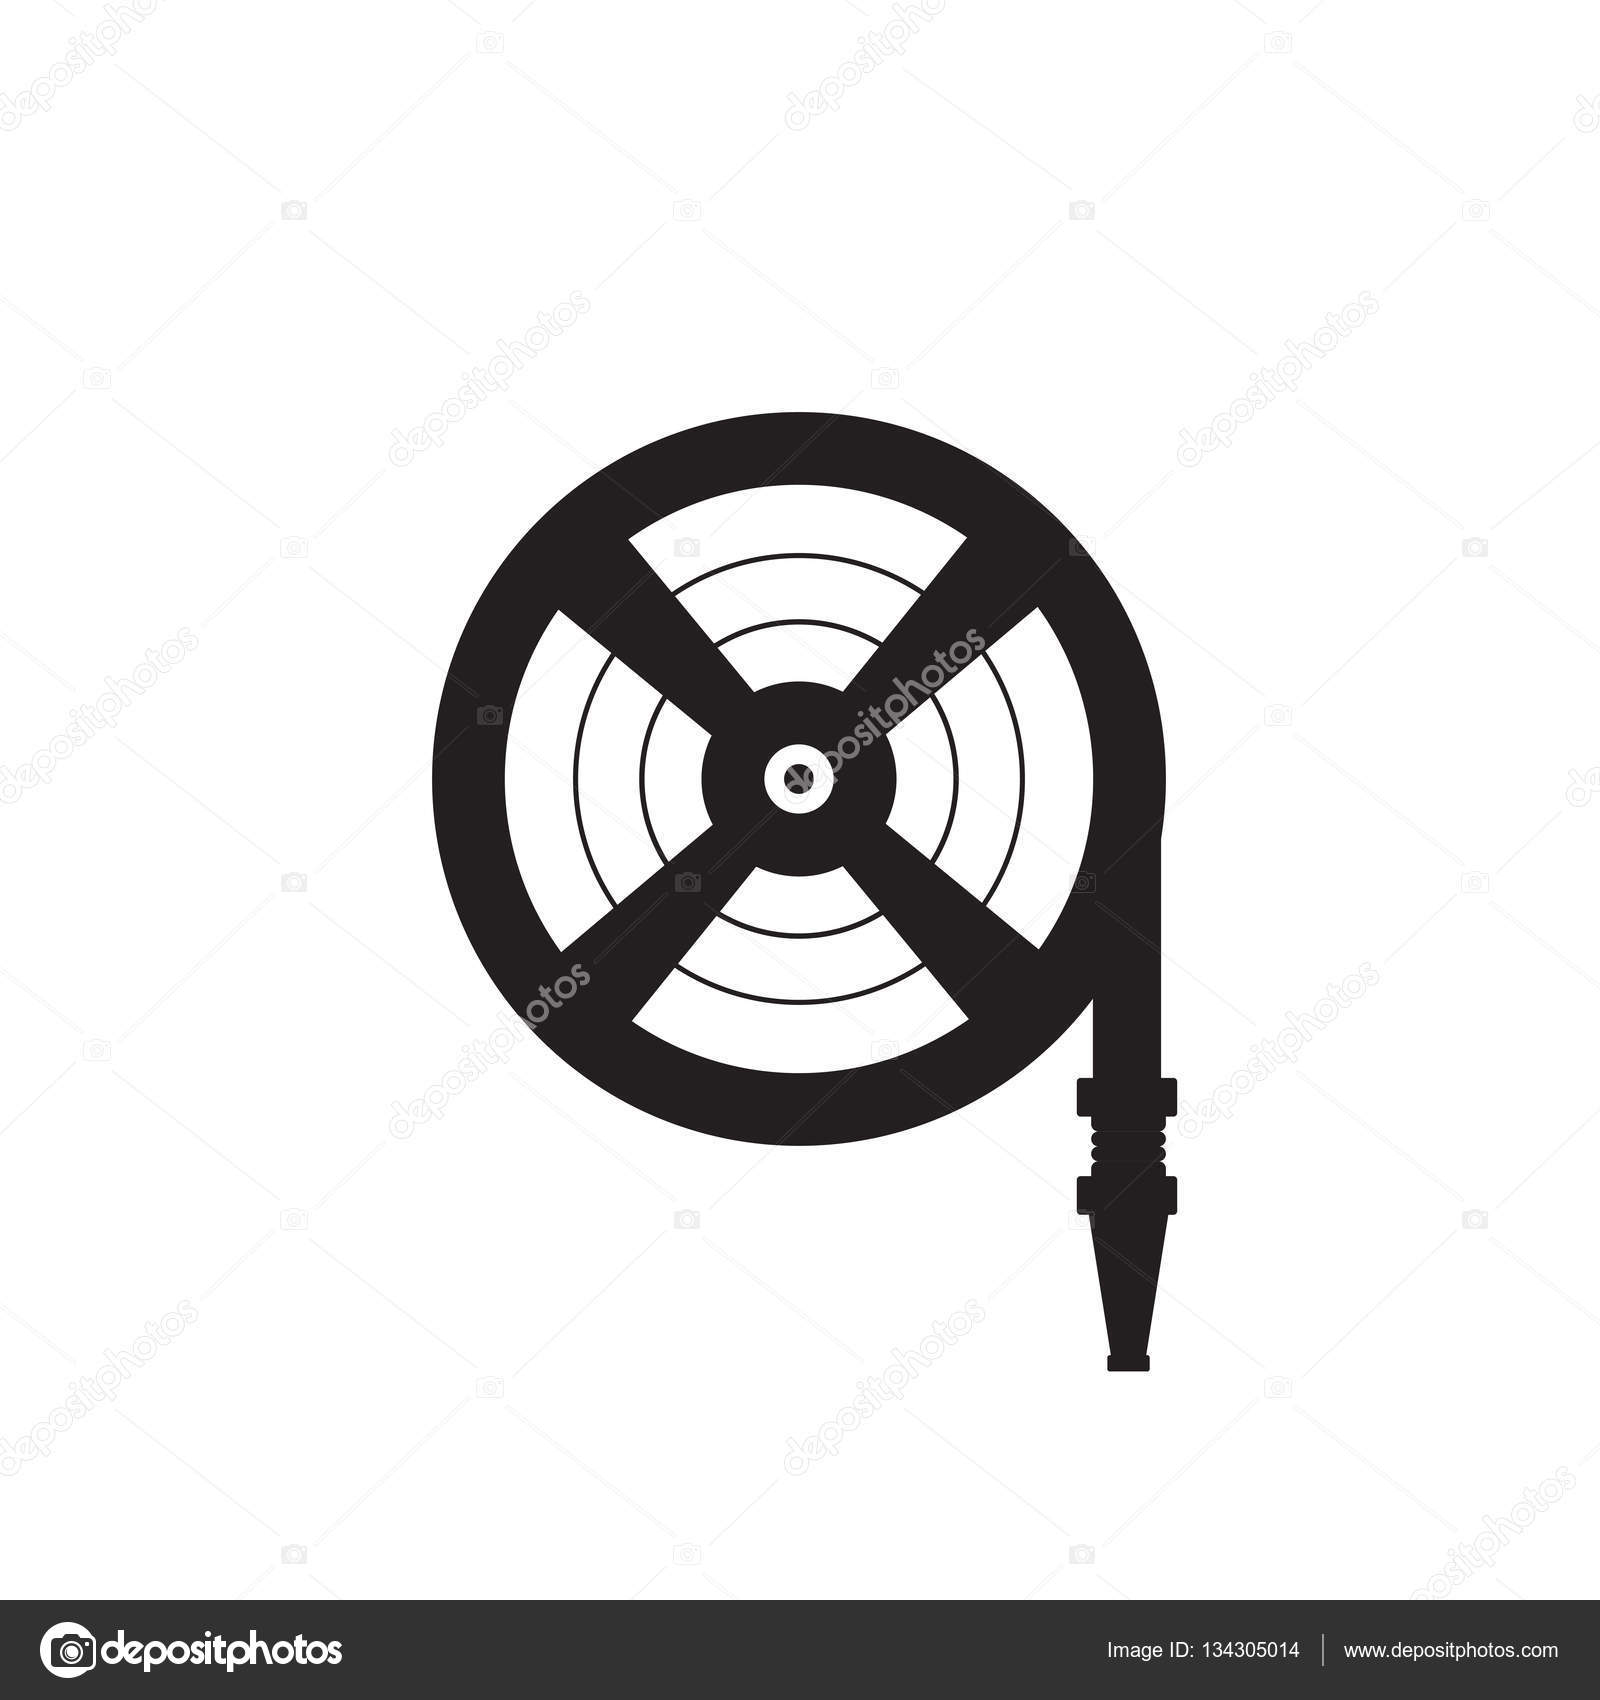 Fire station, Fire hose reel icon. Single silhouette fire equipment icon